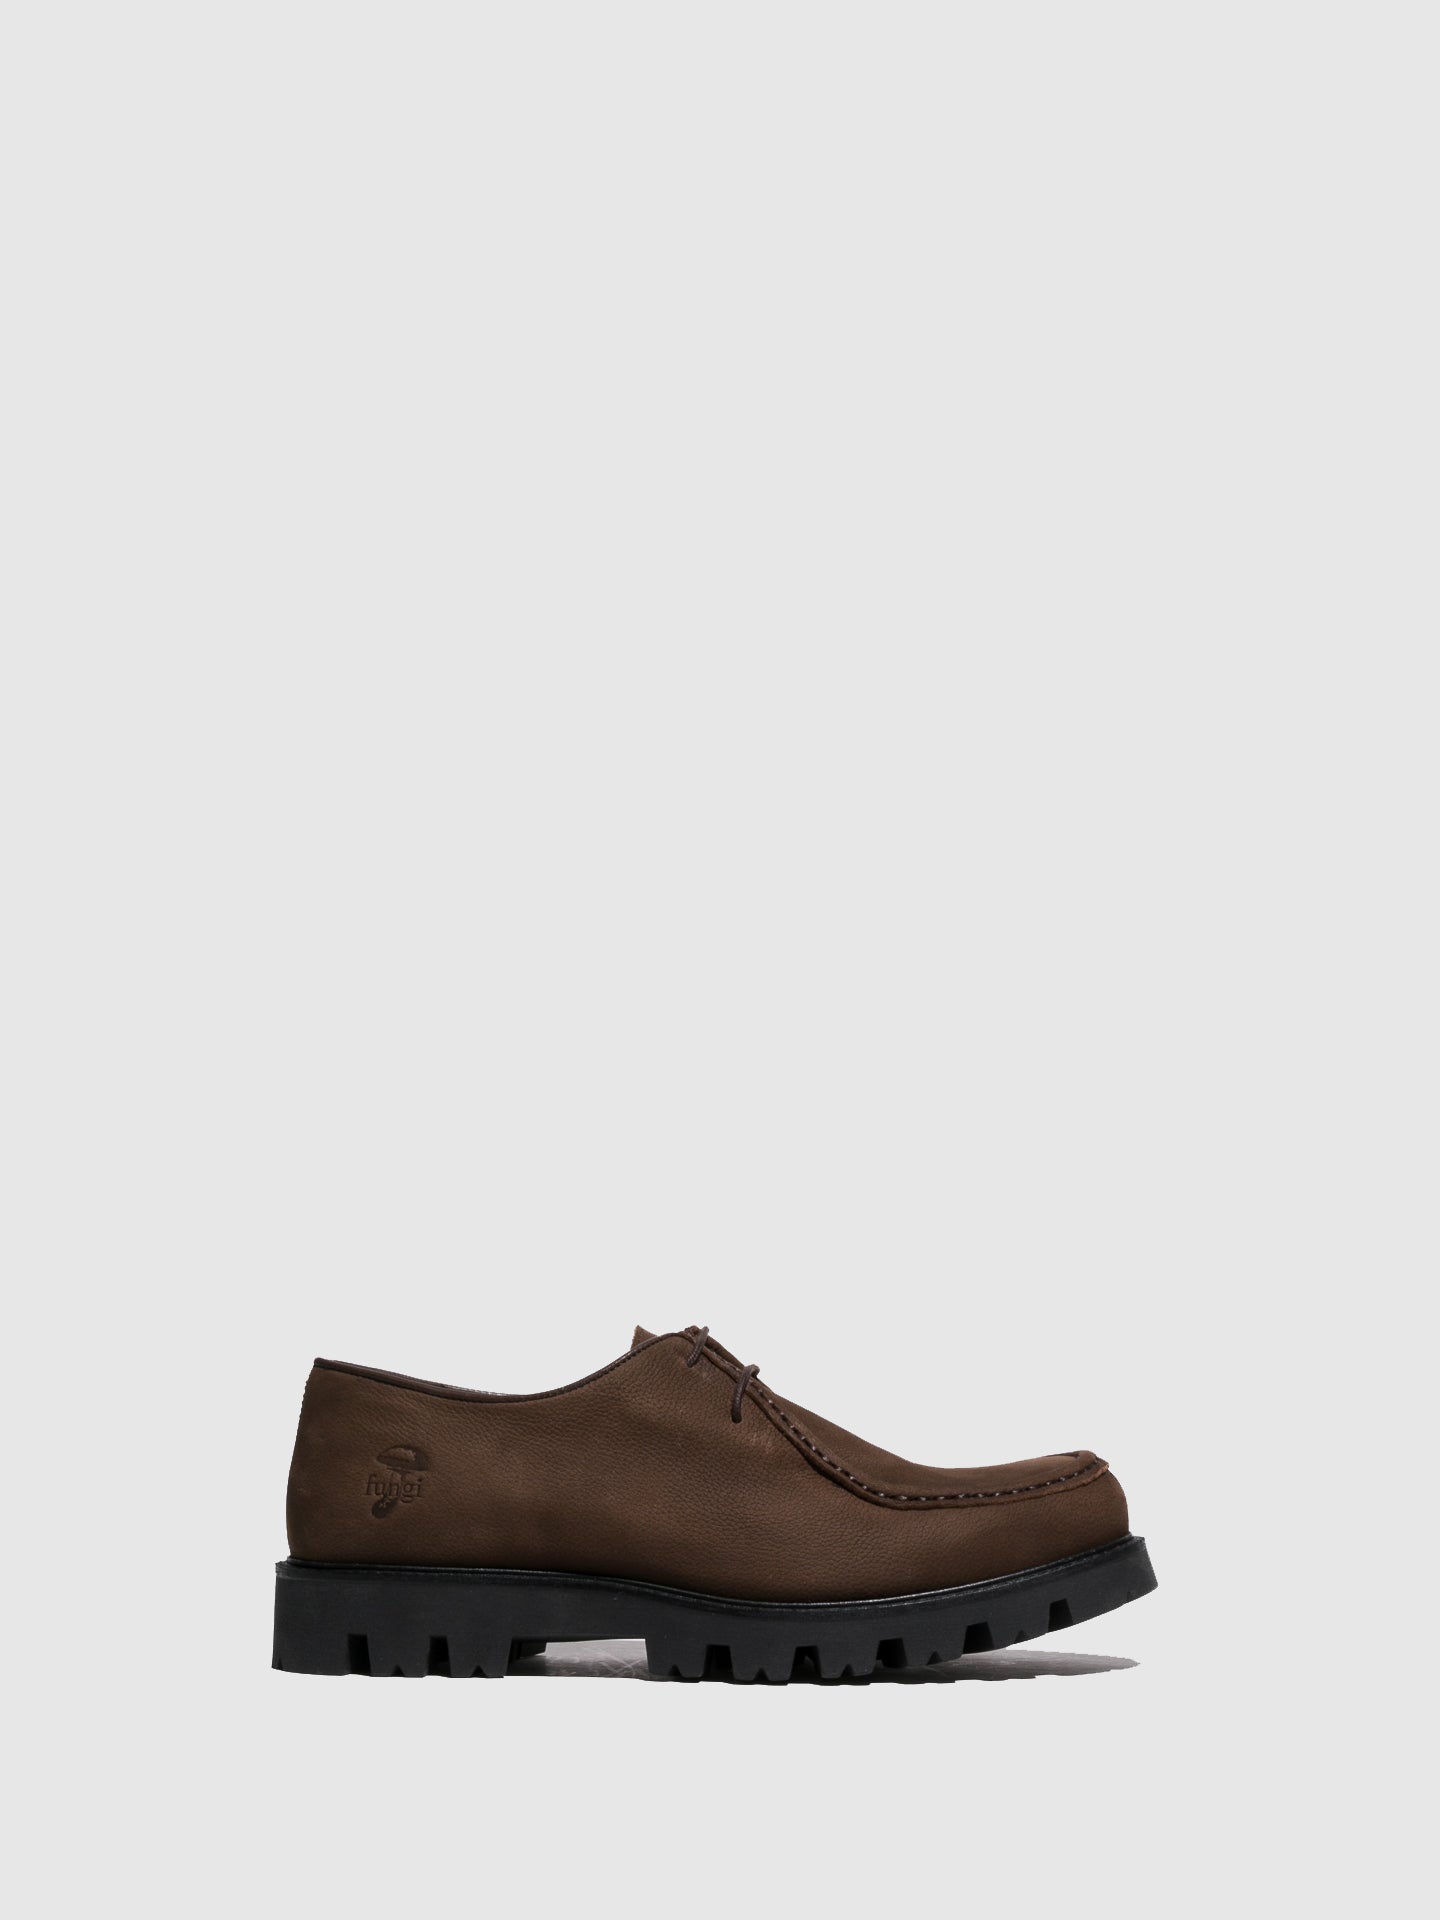 Fungi Brown Lace-up Shoes